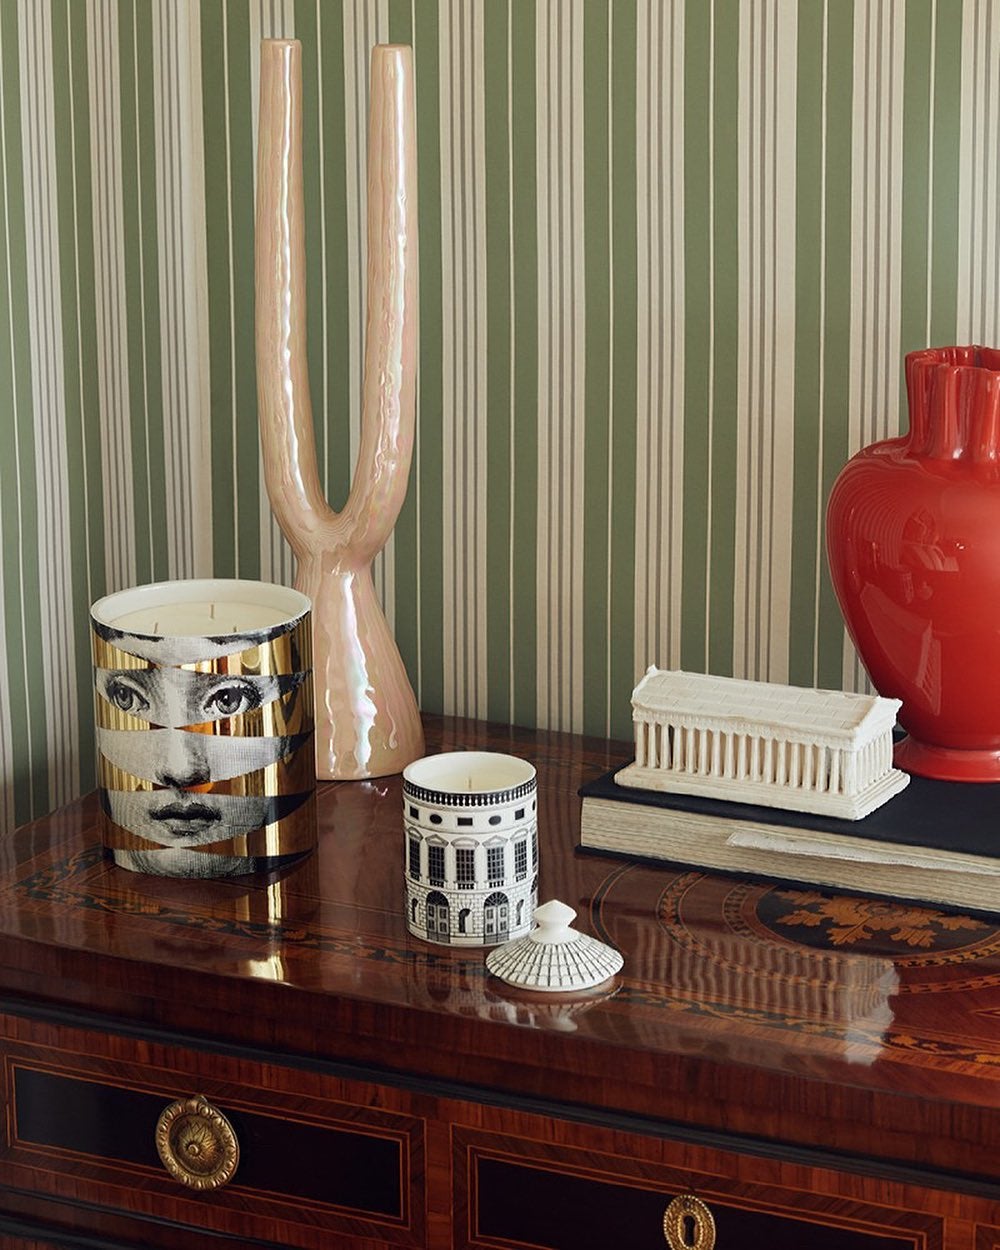 Two fornasetti candles on a a wooden dresser